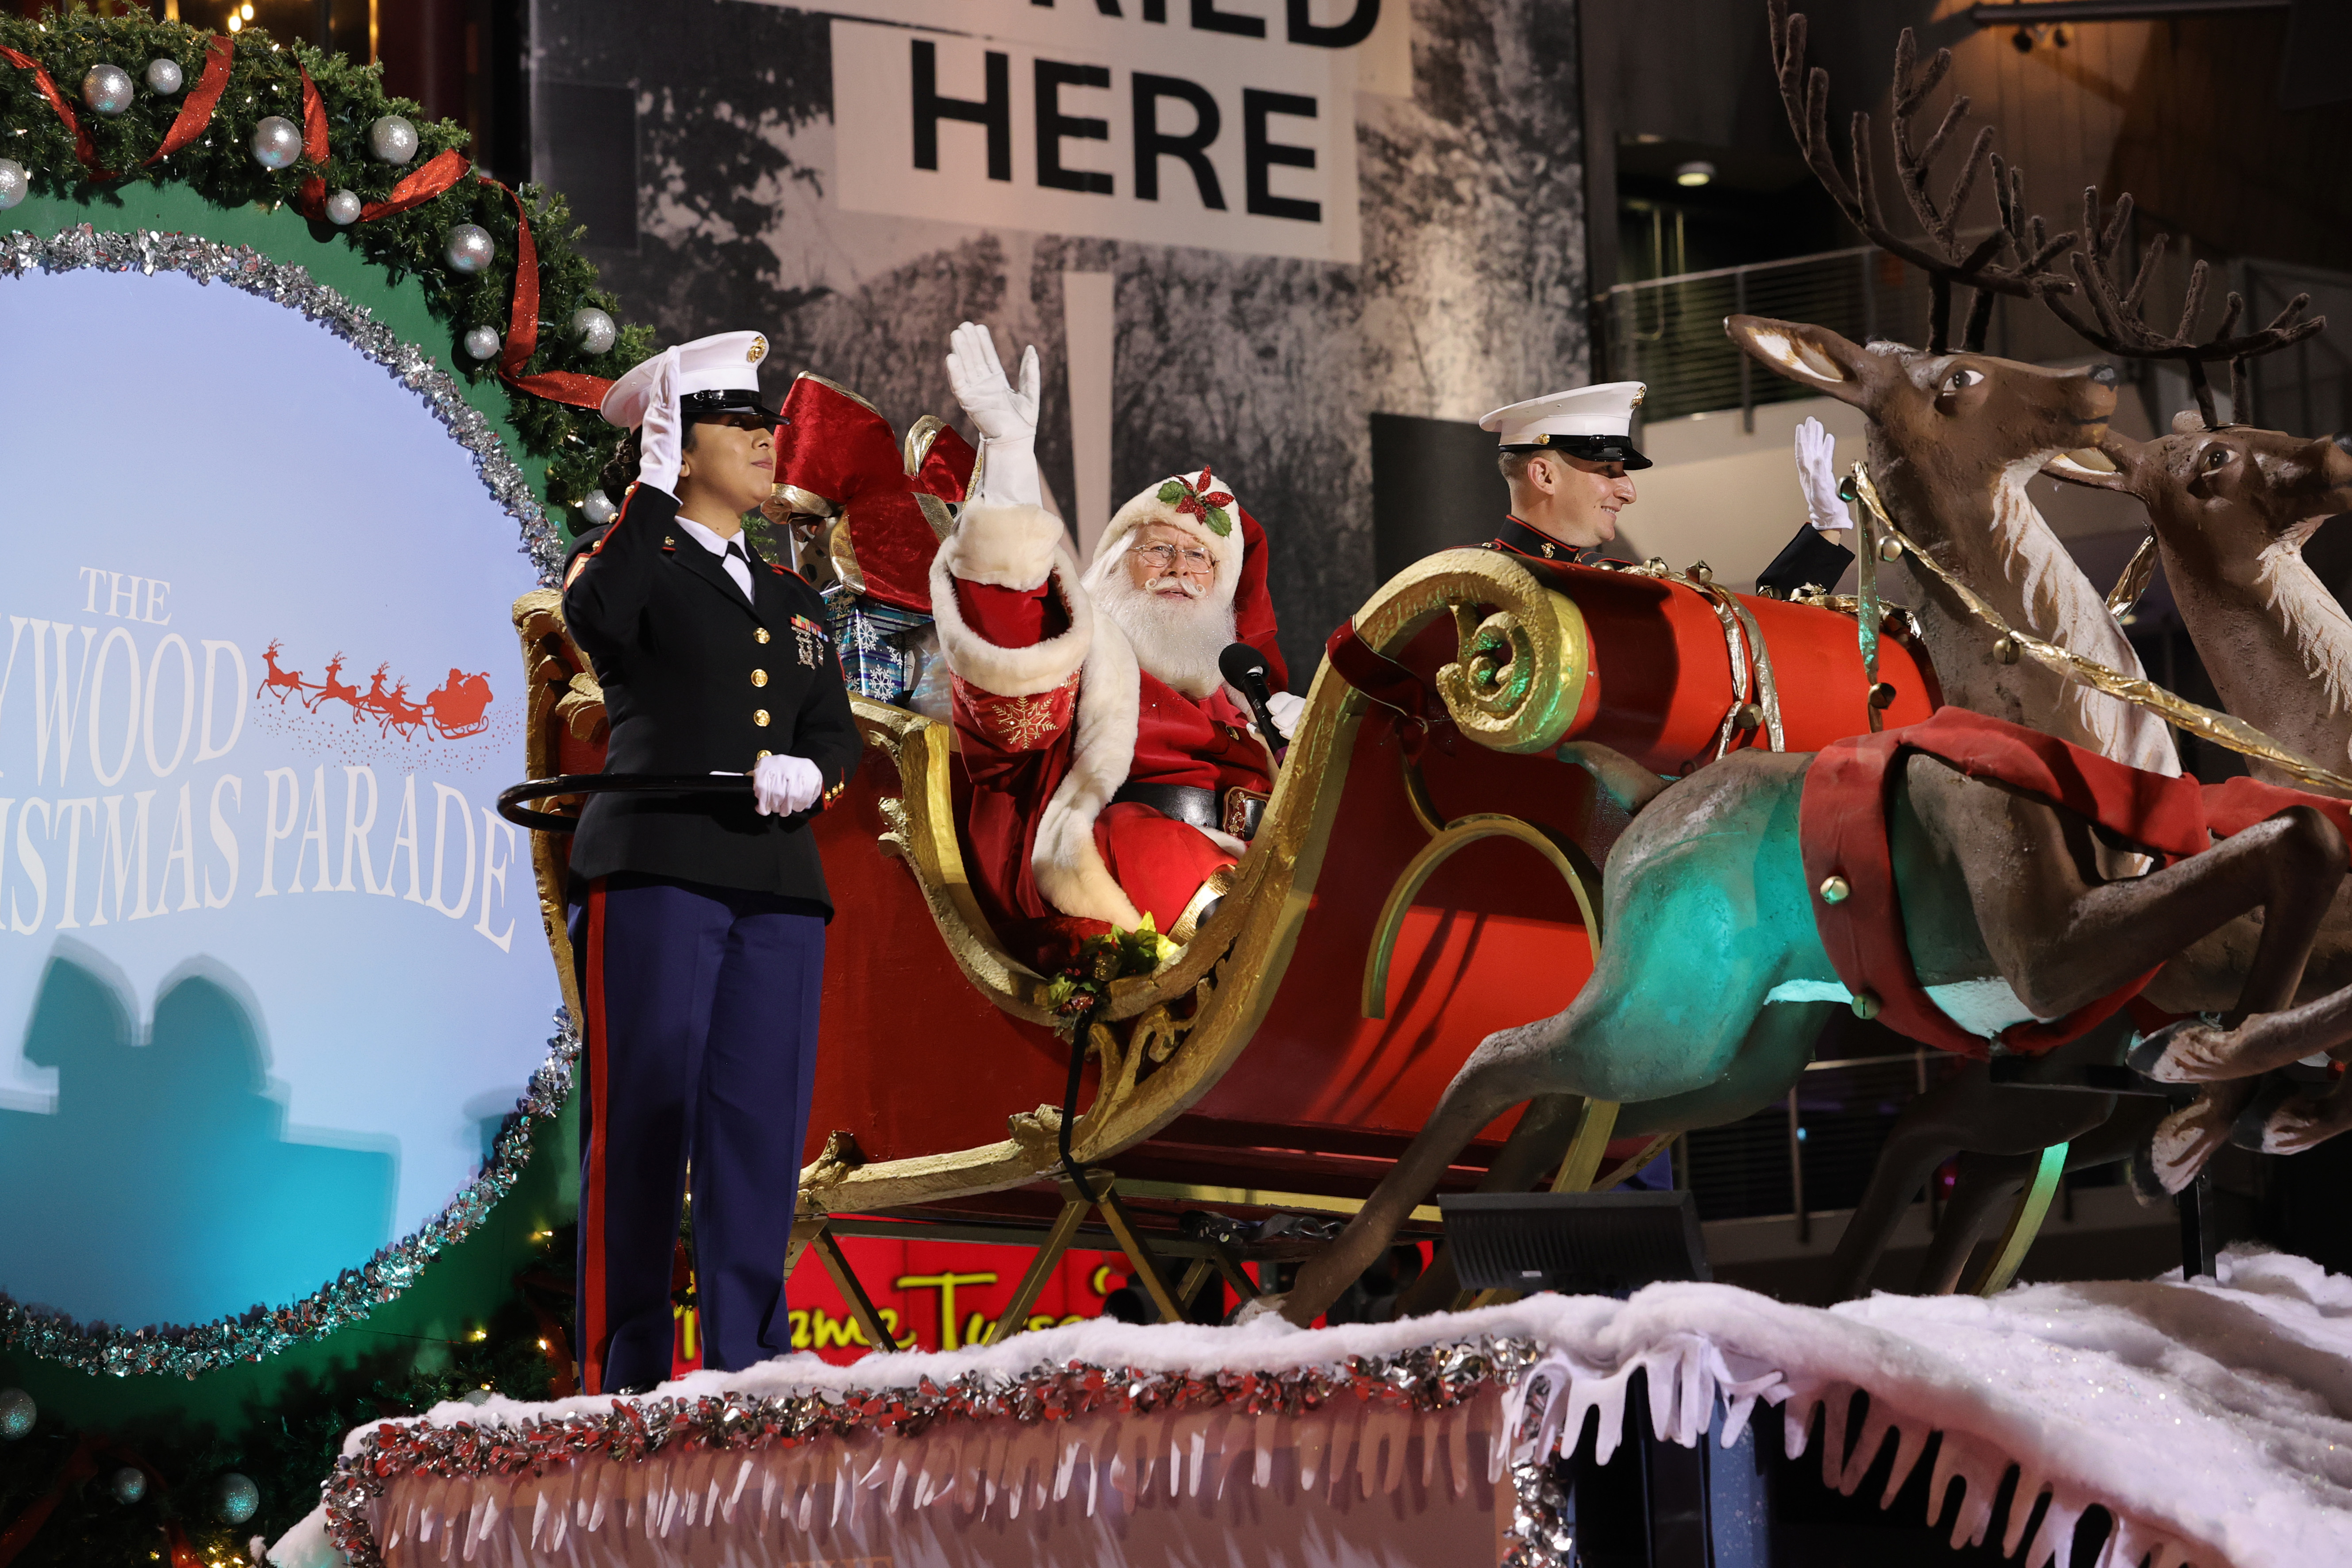 Santa Claus at the 89th Annual Hollywood Christmas Parade in Los Angeles, California on November 28, 2021 | Source: Getty Images